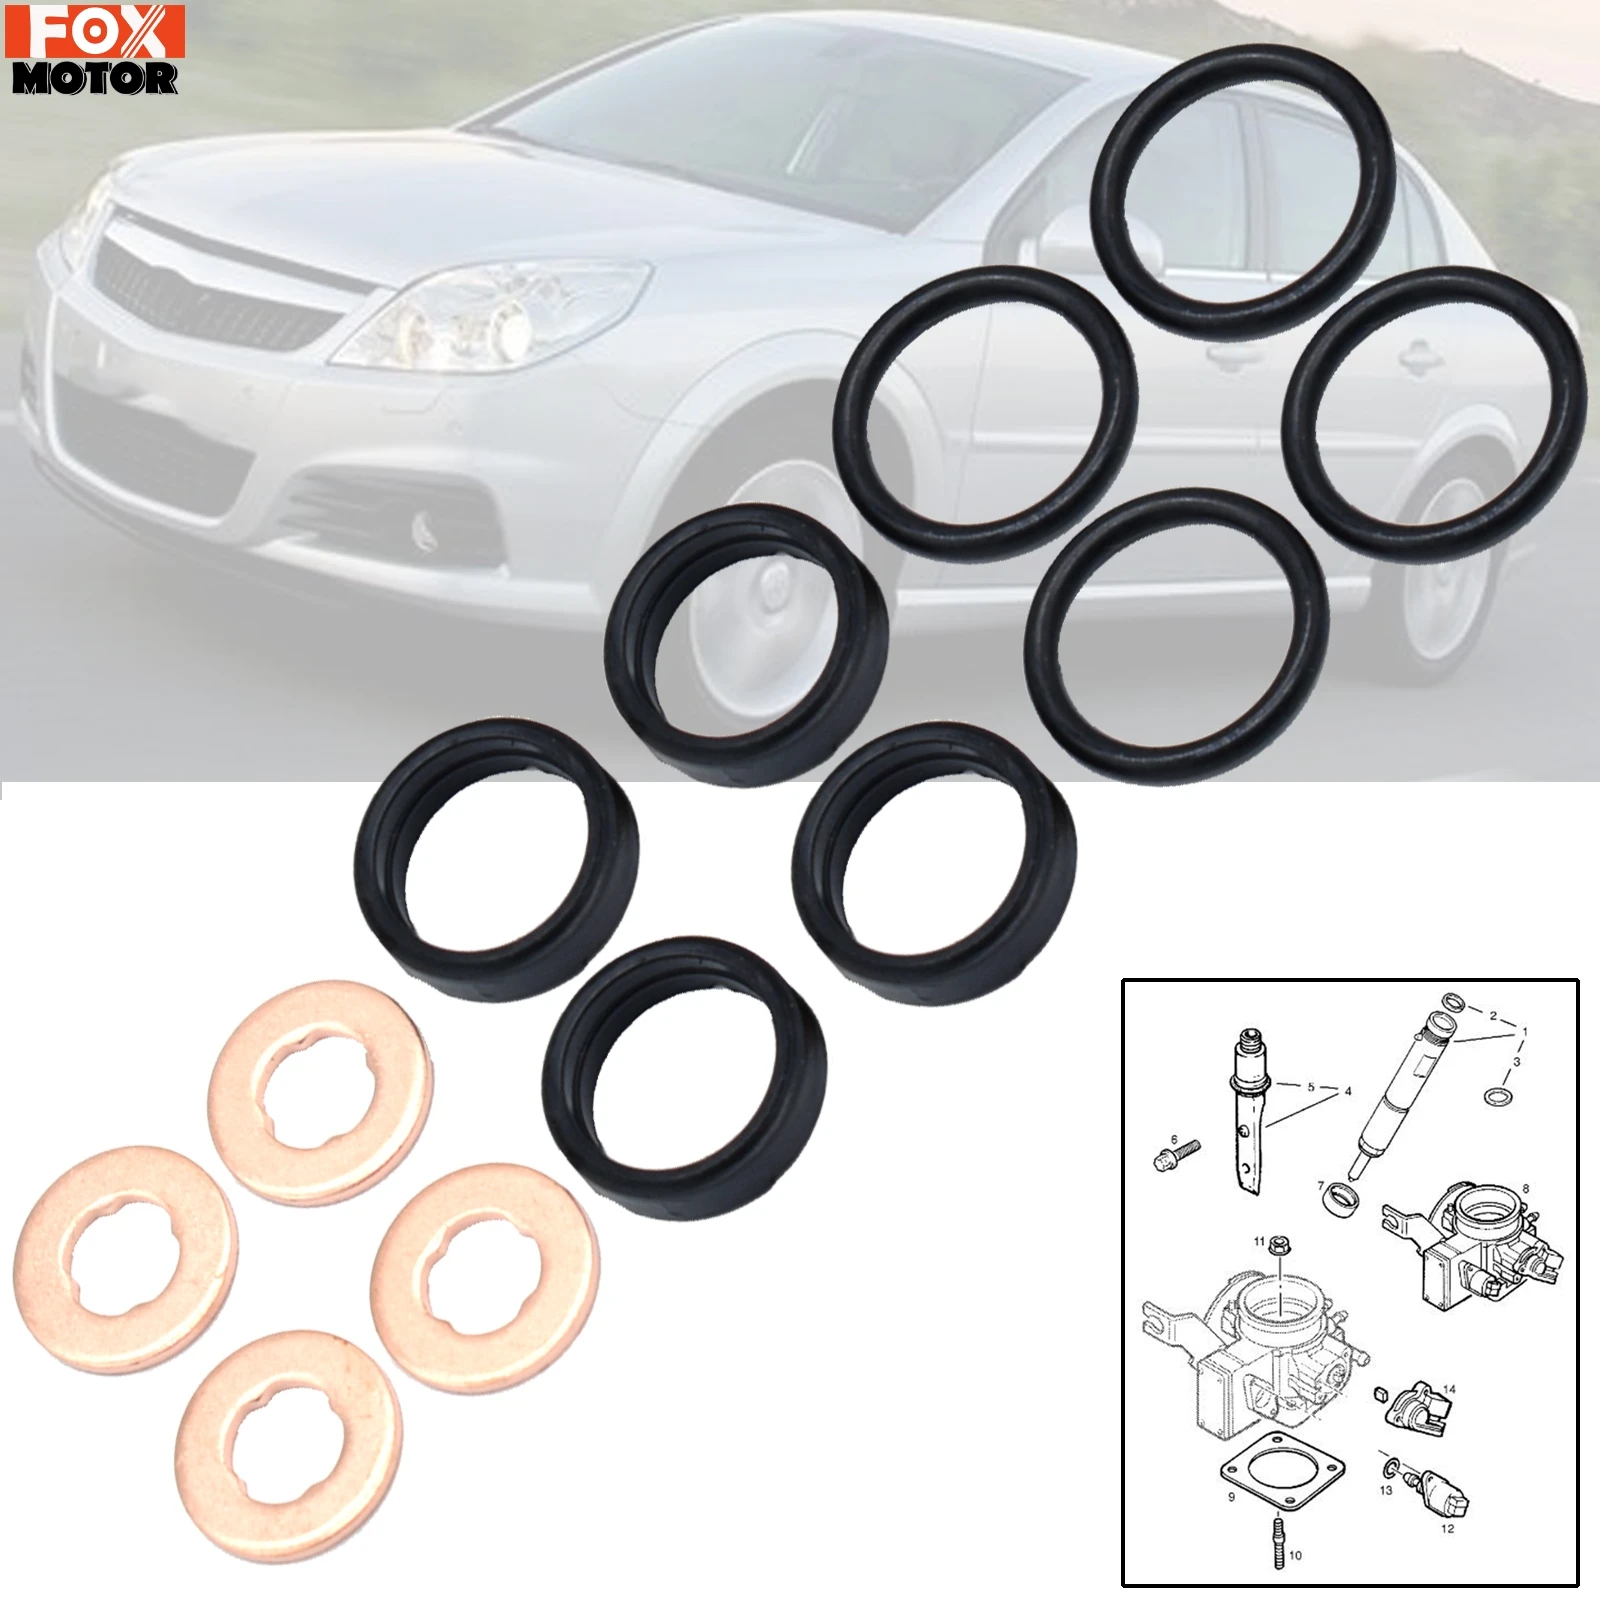 DIESEL PETROL ENGINE FUEL INJECTOR SEAL ORING WASHER KIT FOR OPEL VAUXHALL ASTRA VECTRA SIGNUM ZAFIRA FRONTERA 2000 2001 - 2008